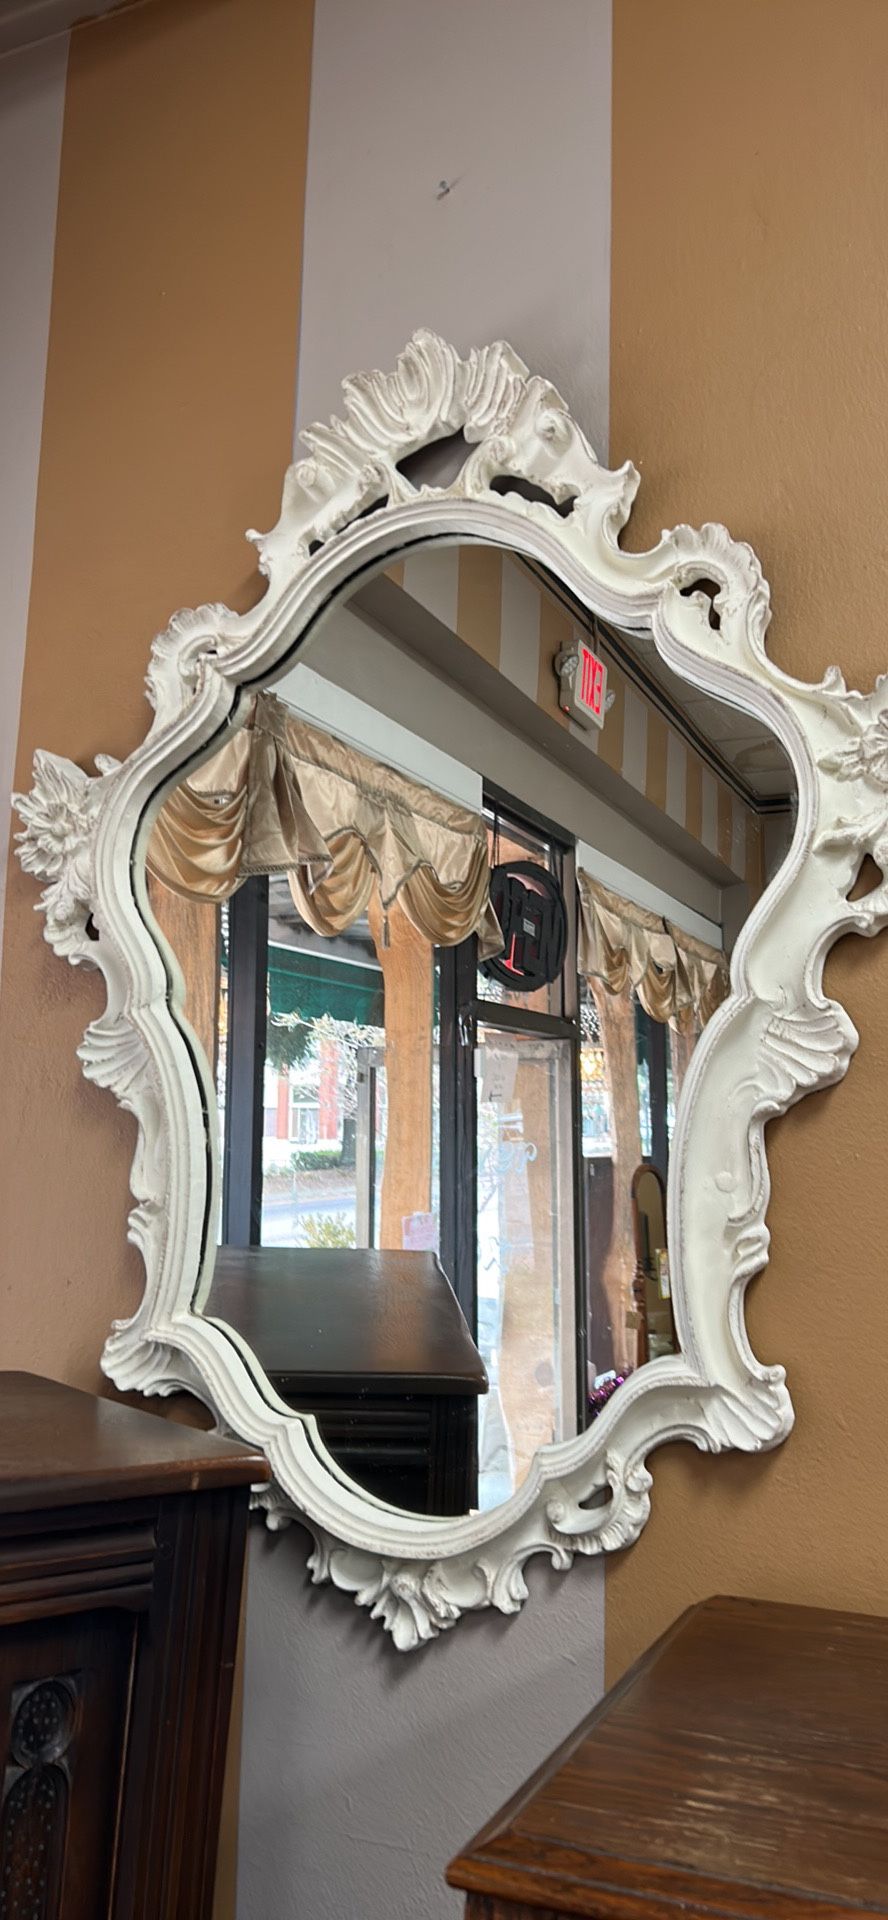 Large, Shabby Chic, Ornate, Antique Mirror